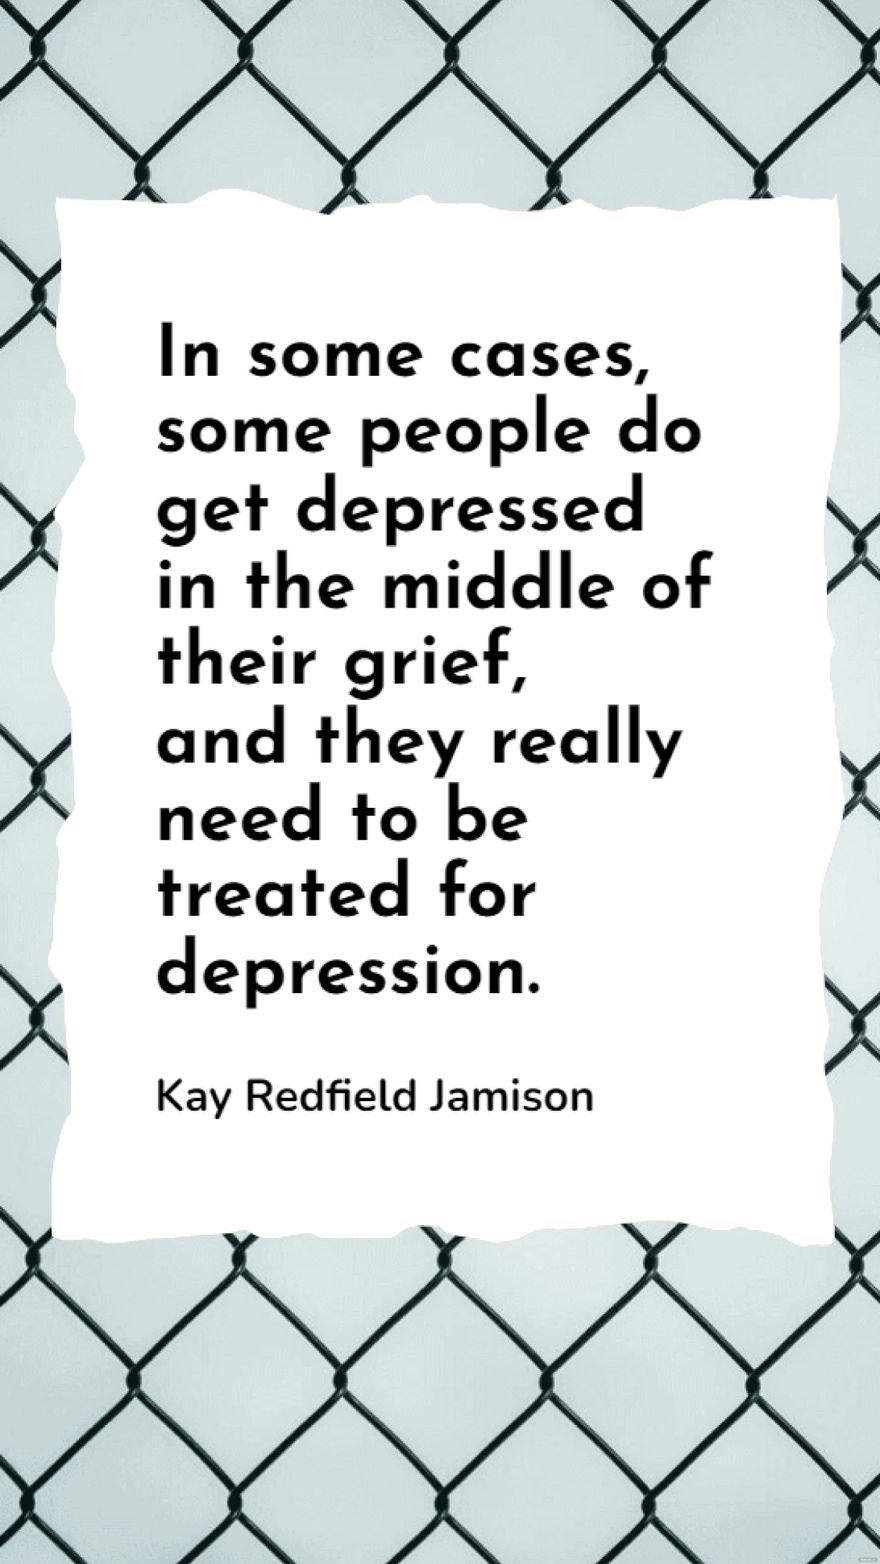 Kay Redfield Jamison - In some cases, some people do get depressed in the middle of their grief, and they really need to be treated for depression.